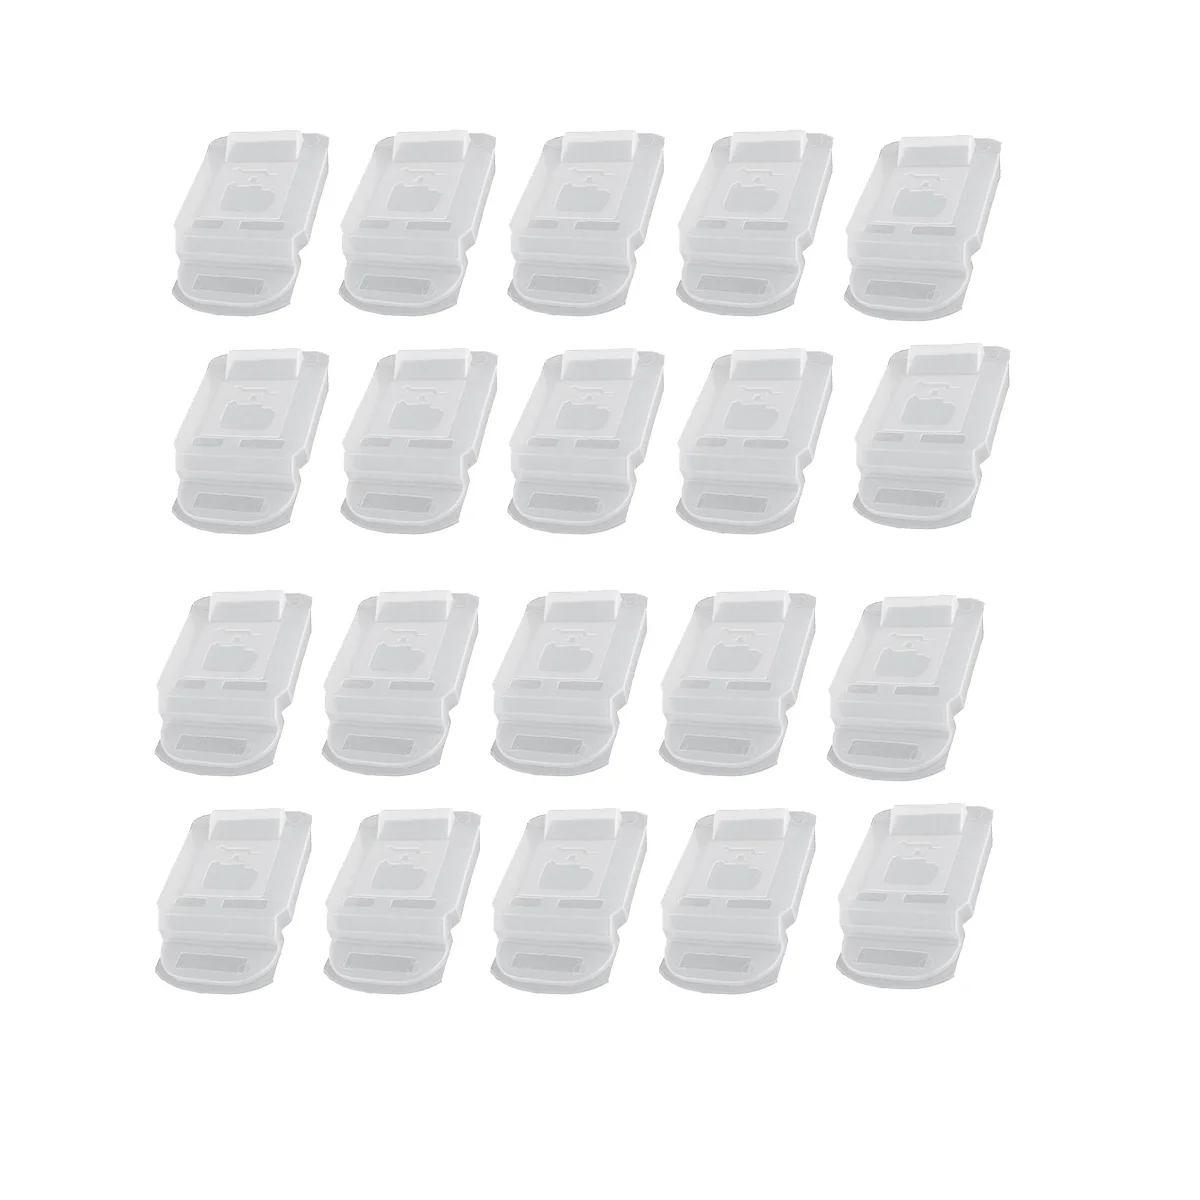 

20PCS Contact Protection Cap Battery Holder for , Dust Cover Shield Case for 14.4V 18V Li-Ion Battery